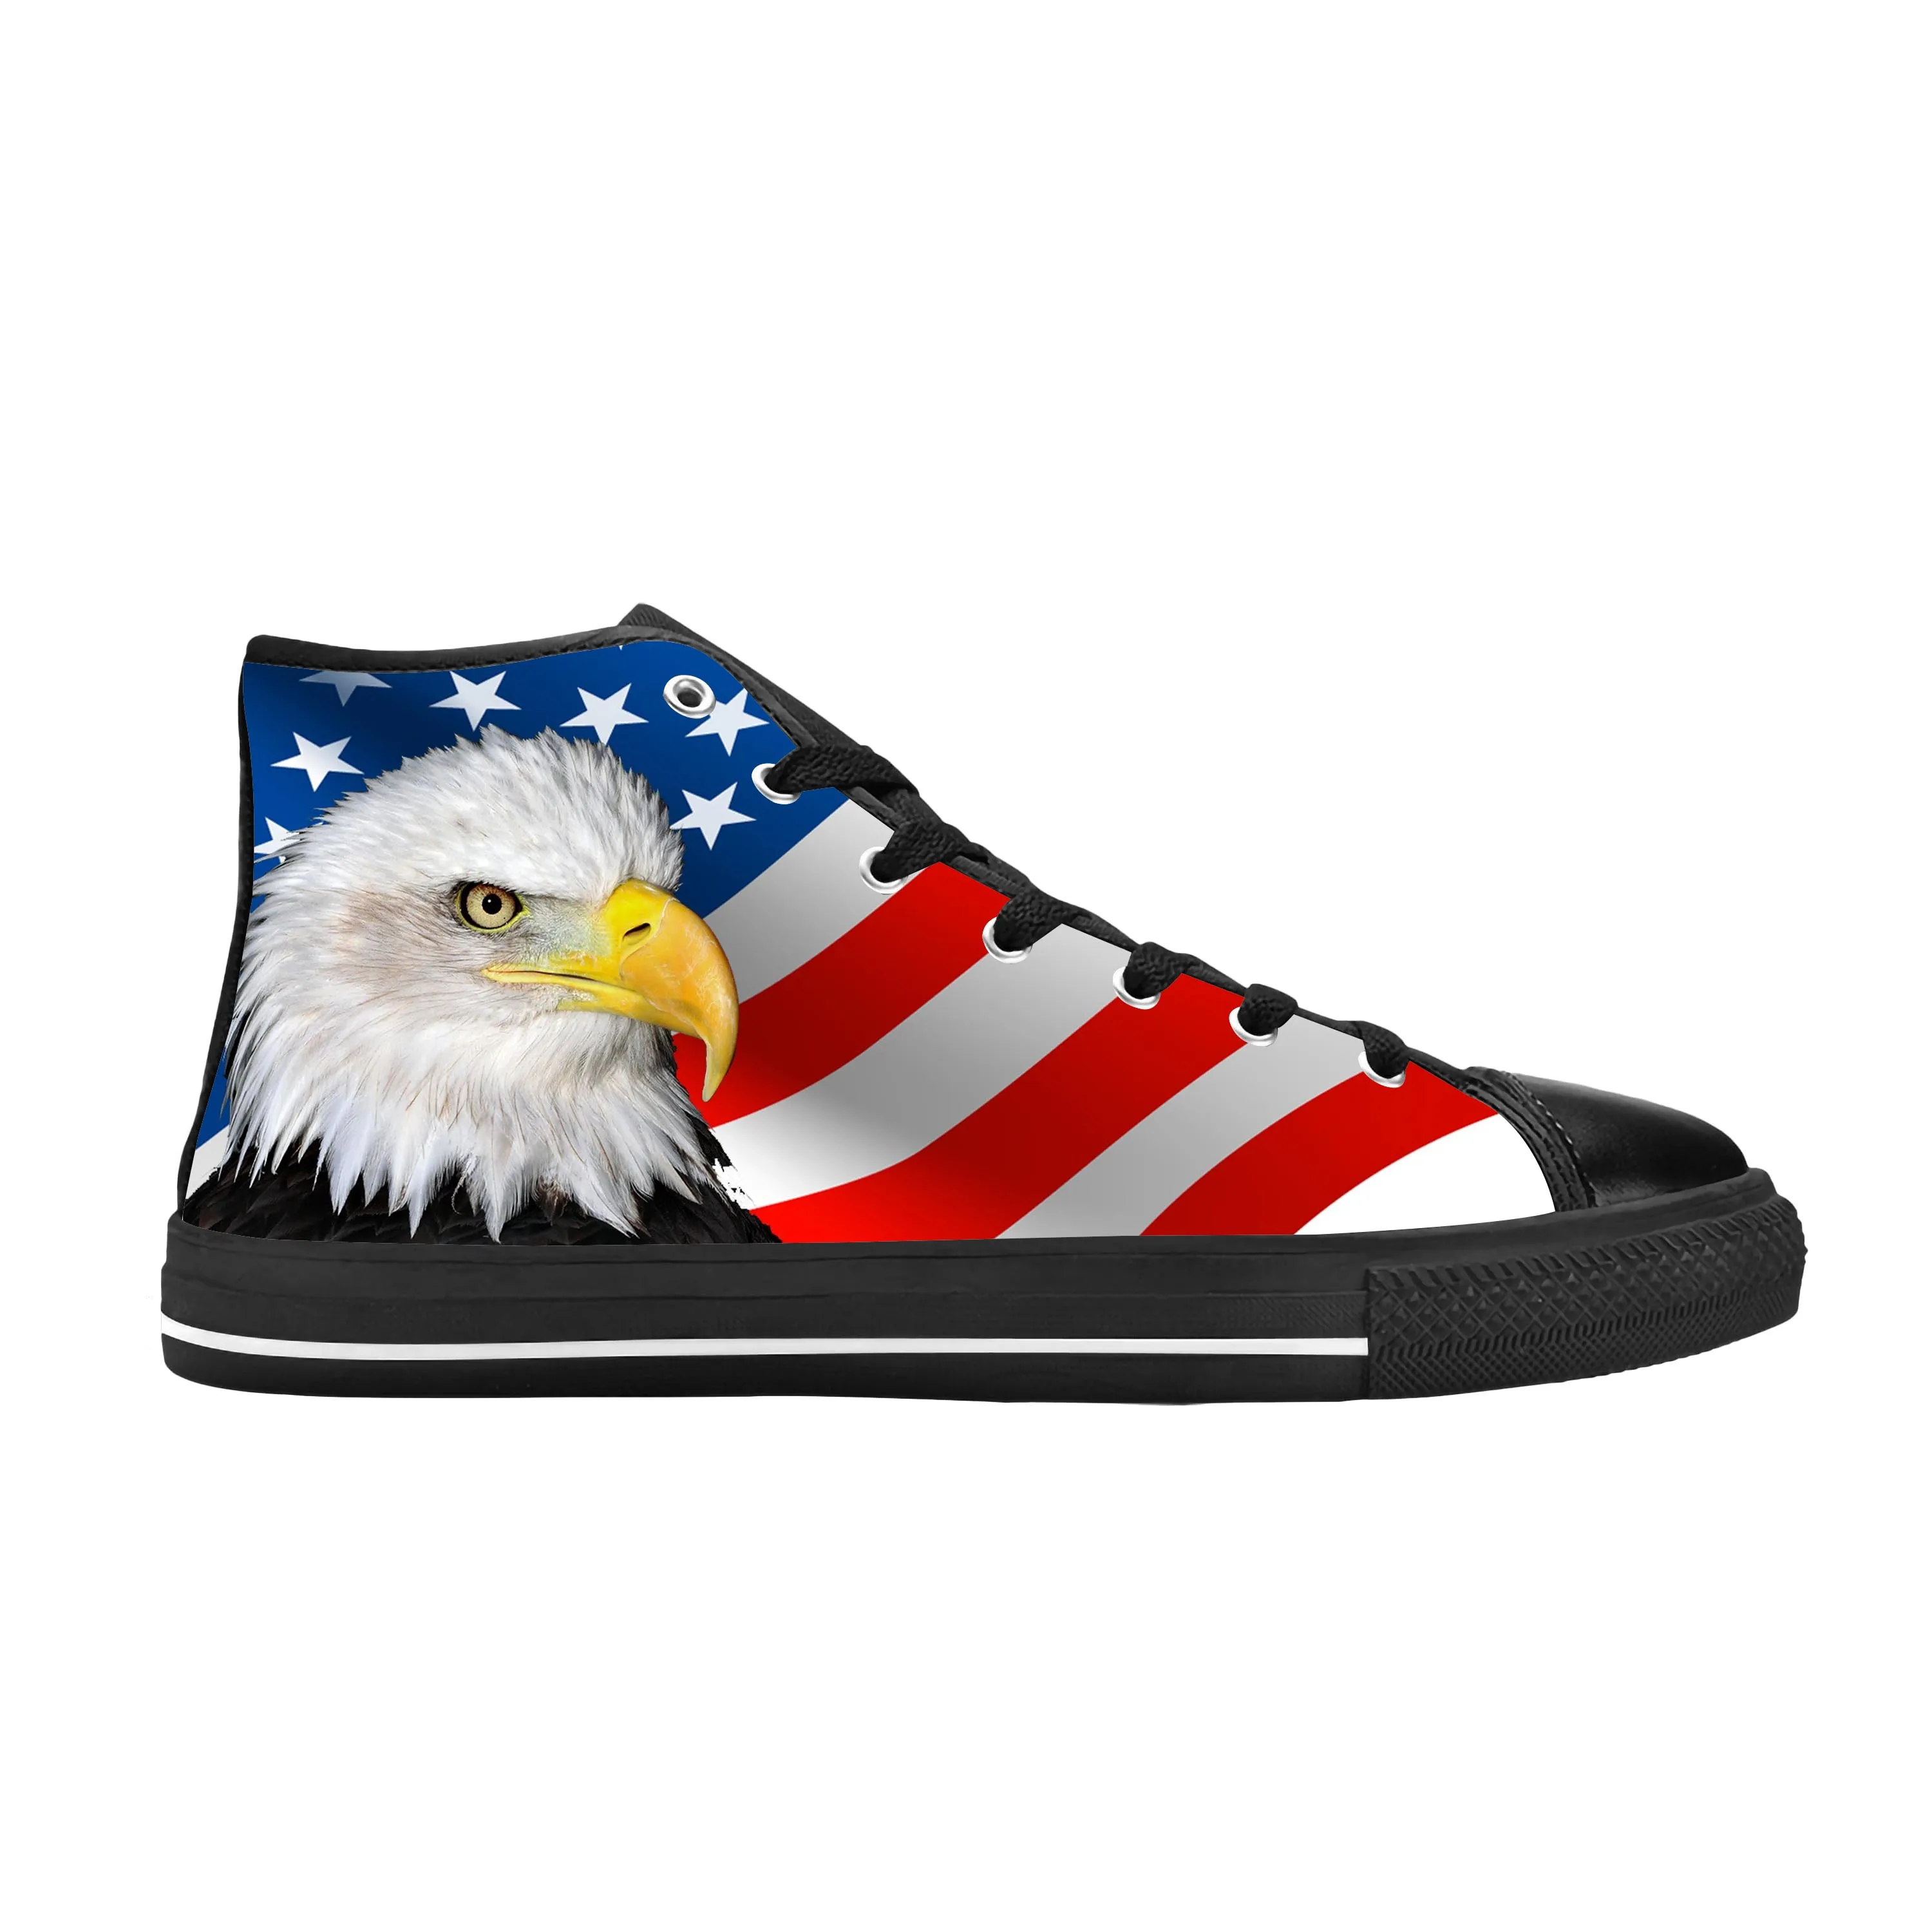 

American Flag Eagle Bald America USA Patriotic Casual Cloth Shoes High Top Comfortable Breathable 3D Print Men Women Sneakers